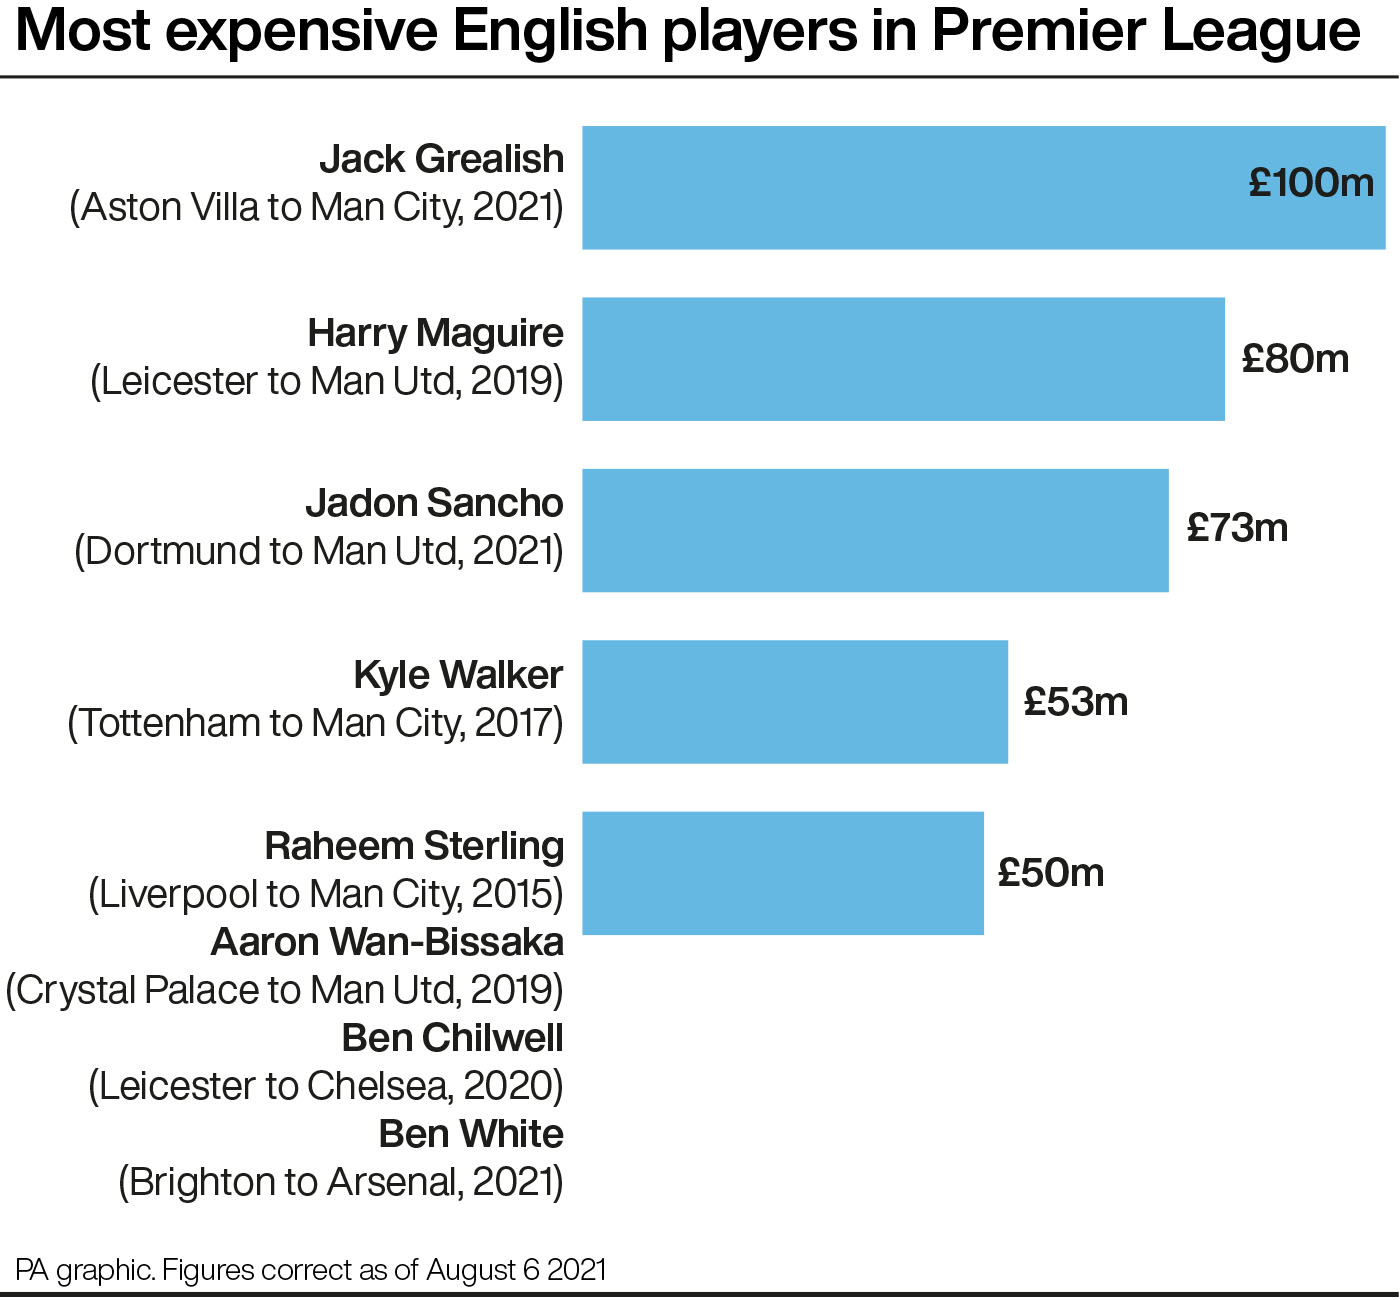 Most expensive English players